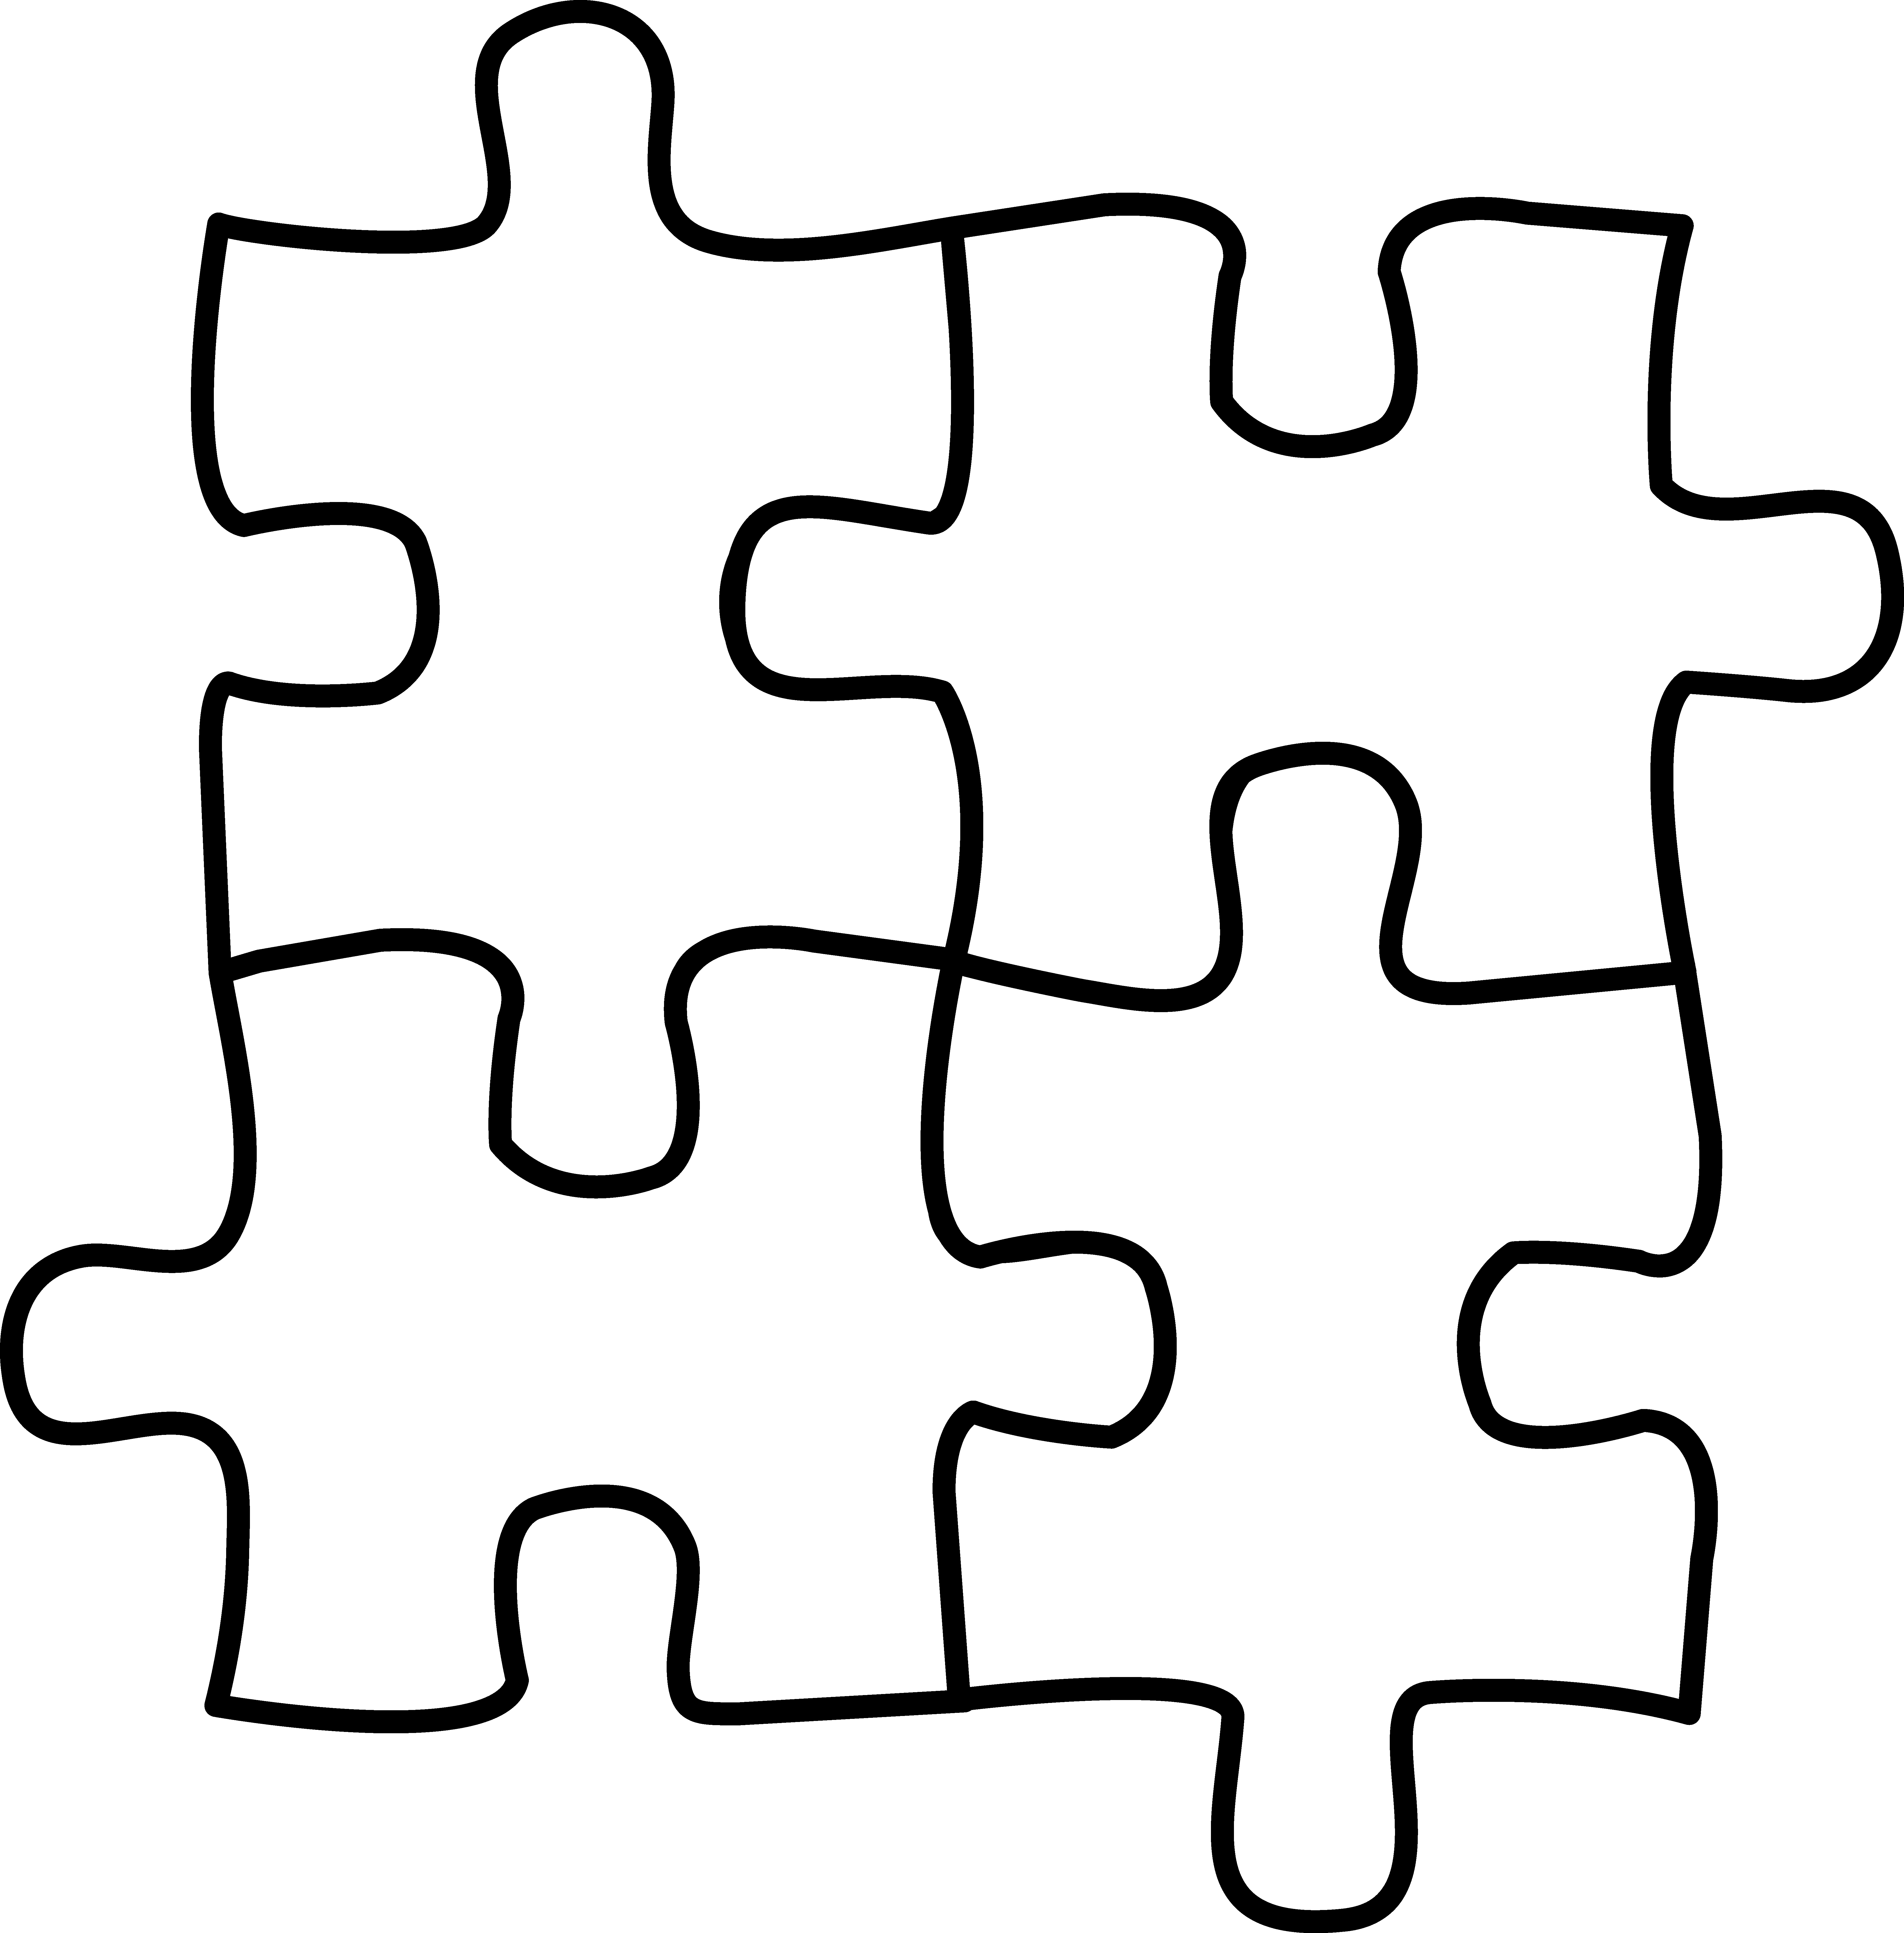  collection of free. Puzzle clipart animated